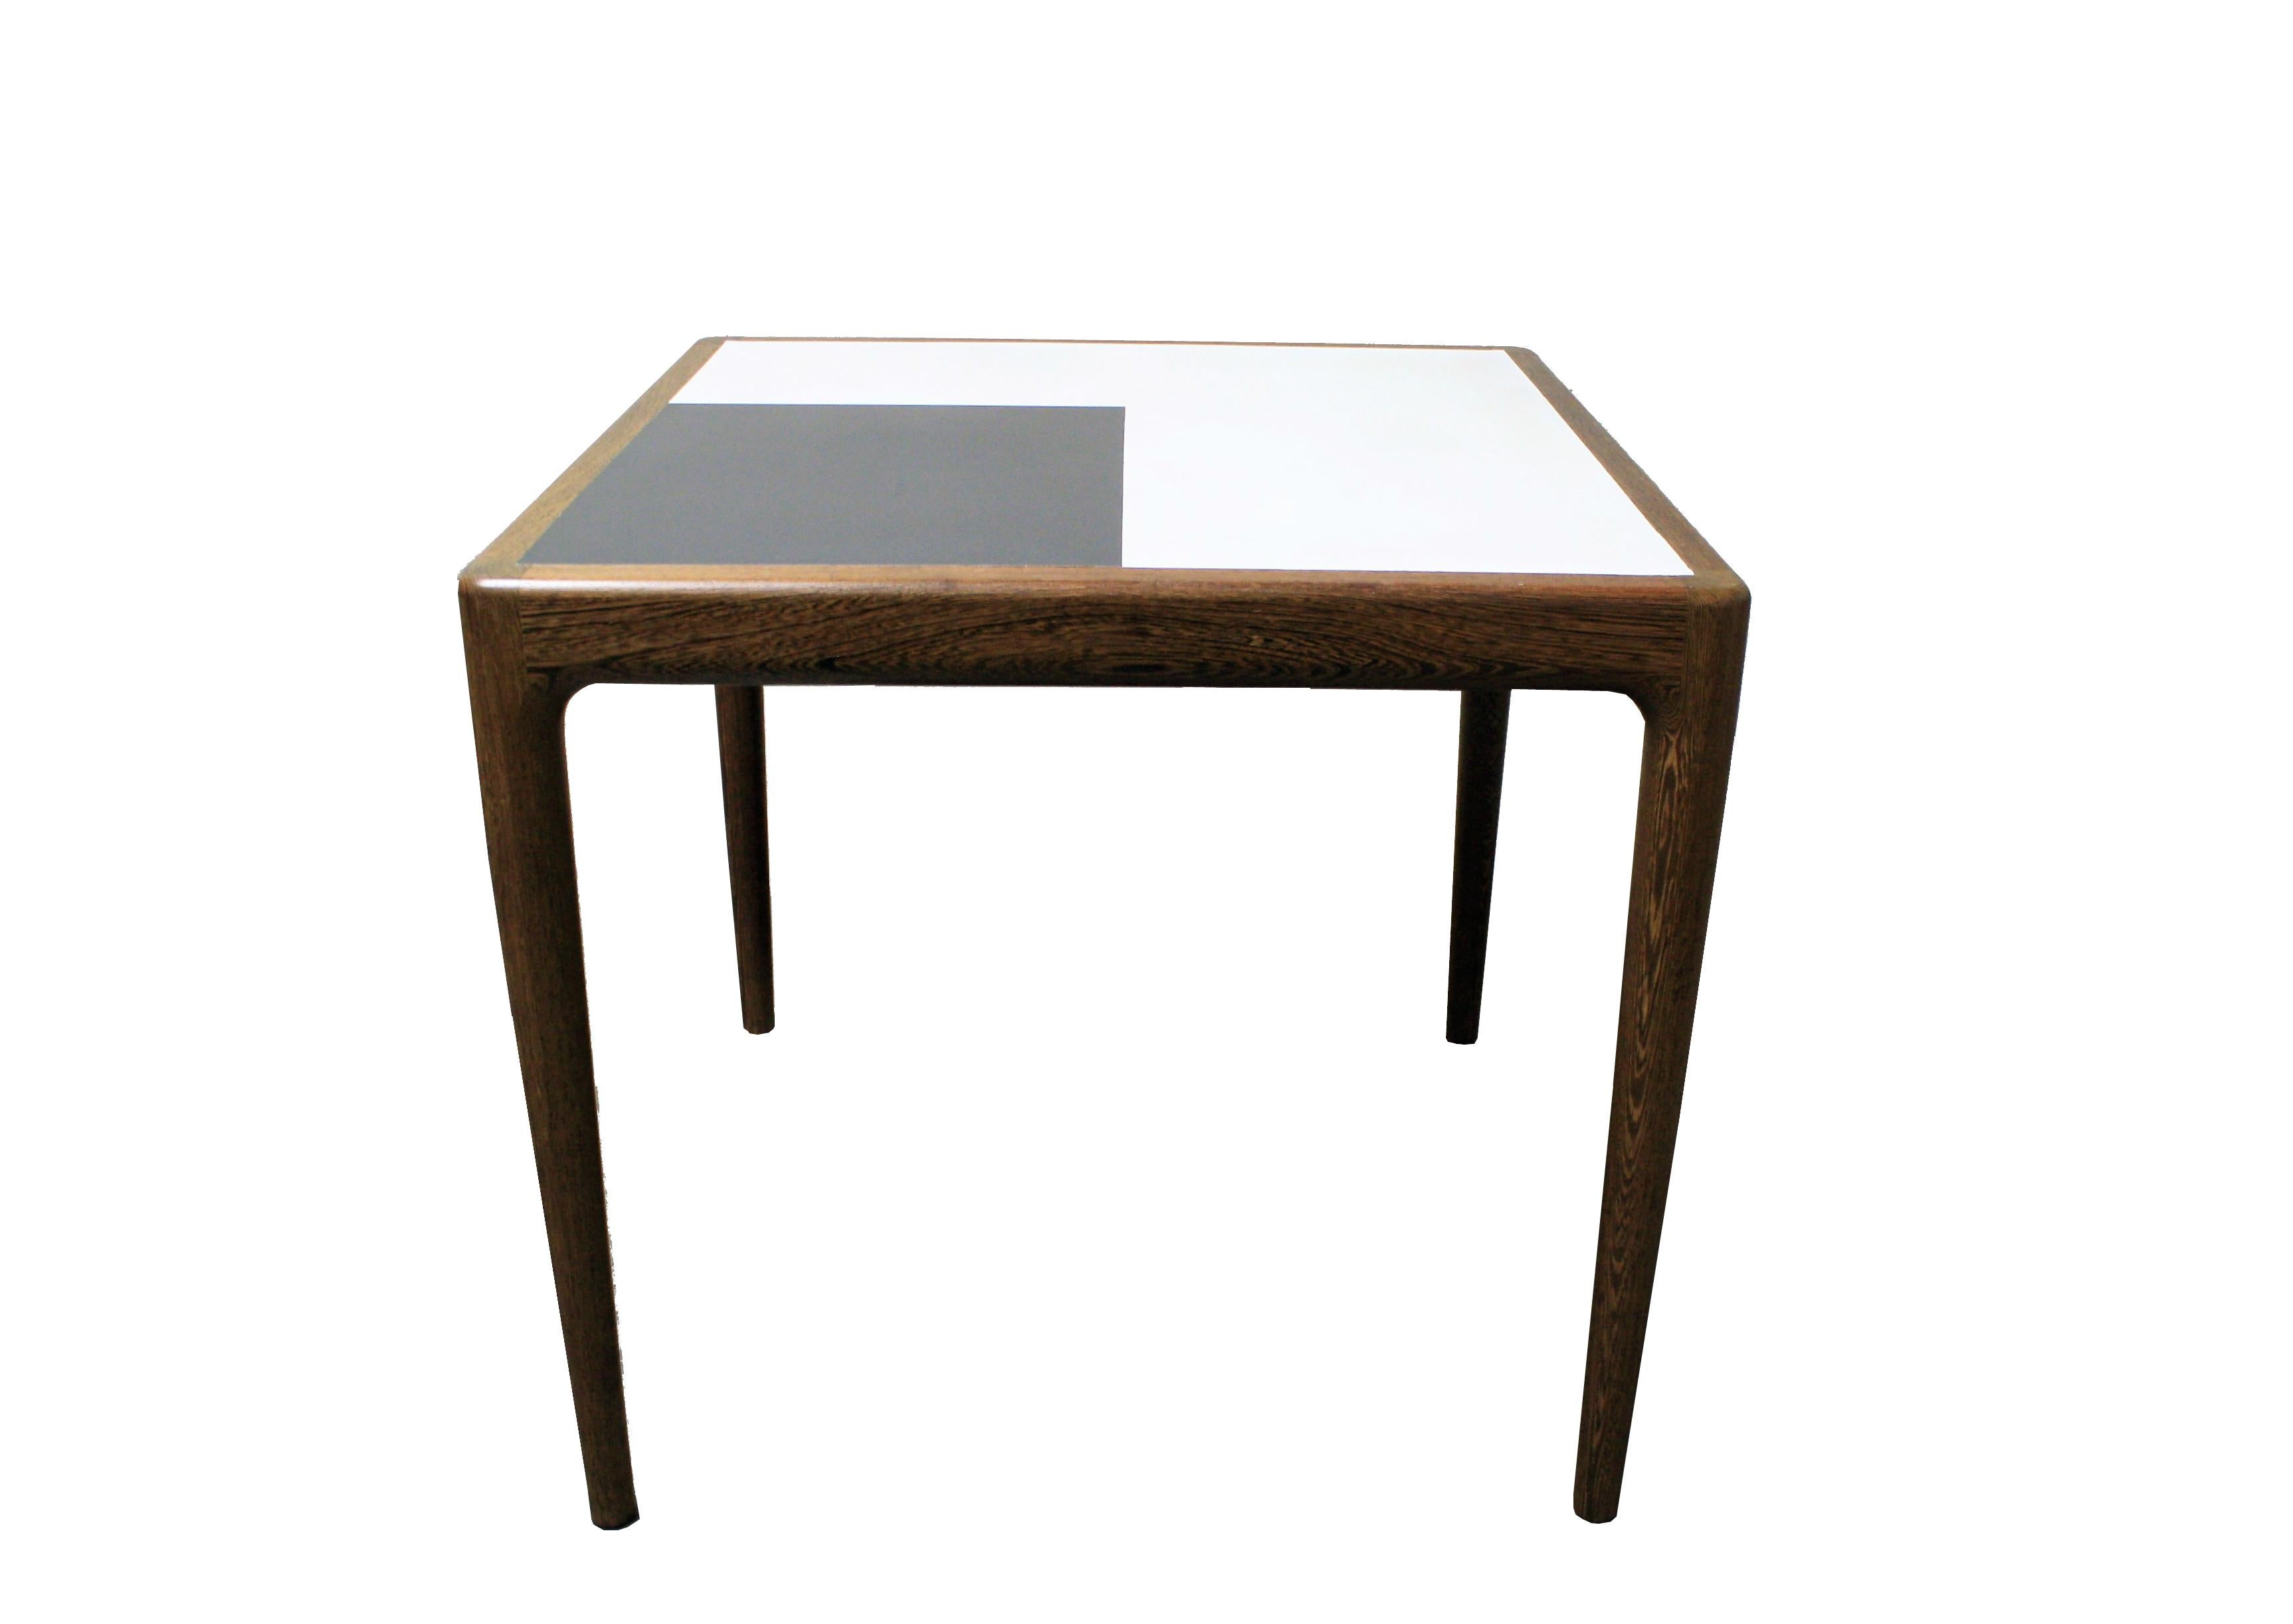 Important Mid-Century Modern table by Jos De Mey for Van Den Berghe Pauvers.

This black and white formica table is made of a stunning wood quality which shows a beautiful pattern.

This design table is ideal as a side table or even as a small